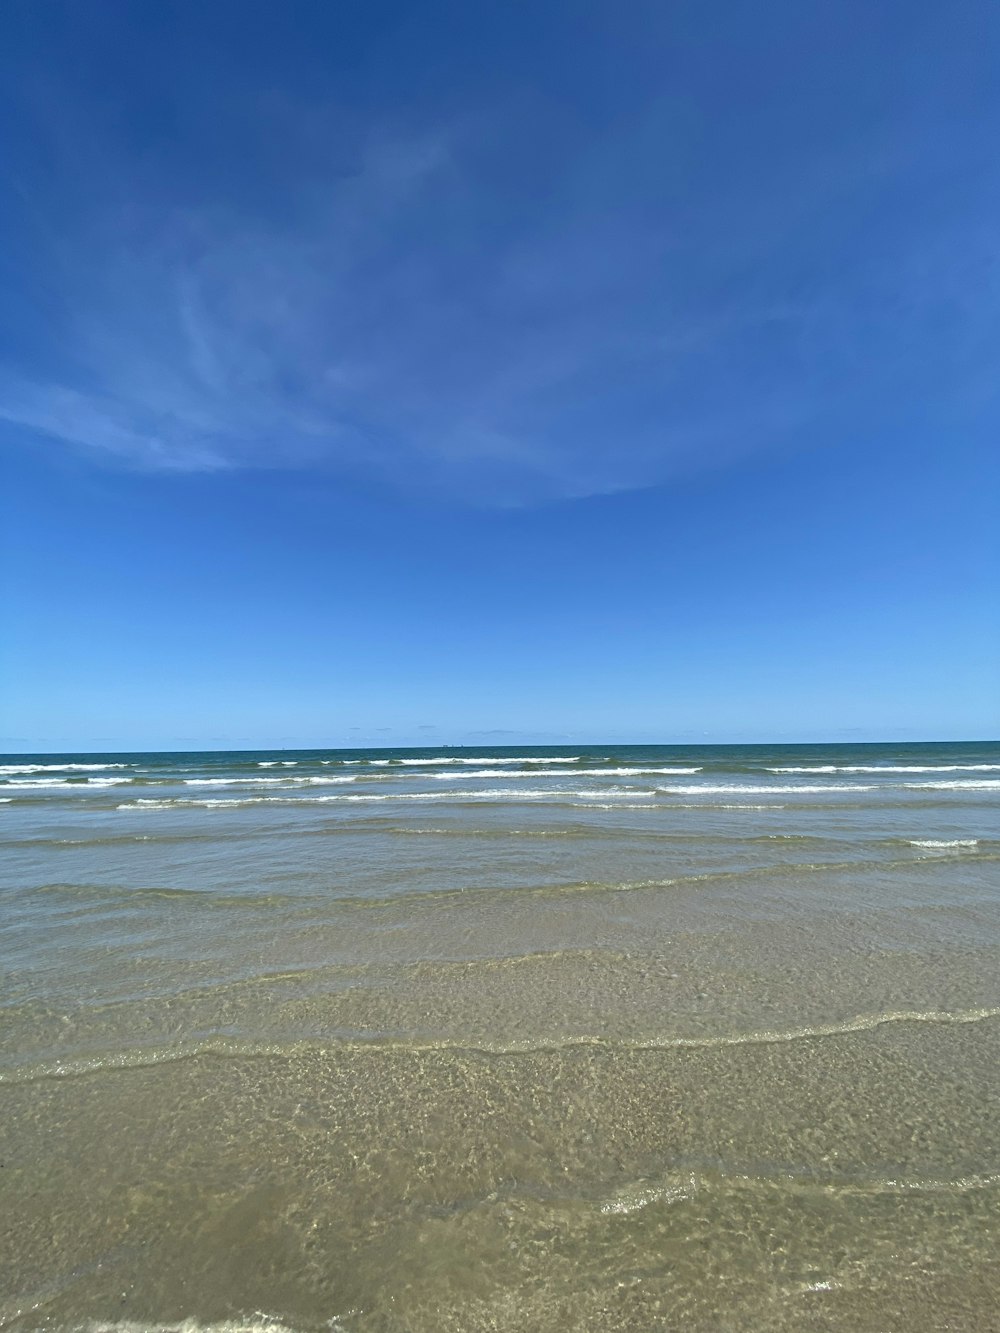 blue sky over beach during daytime